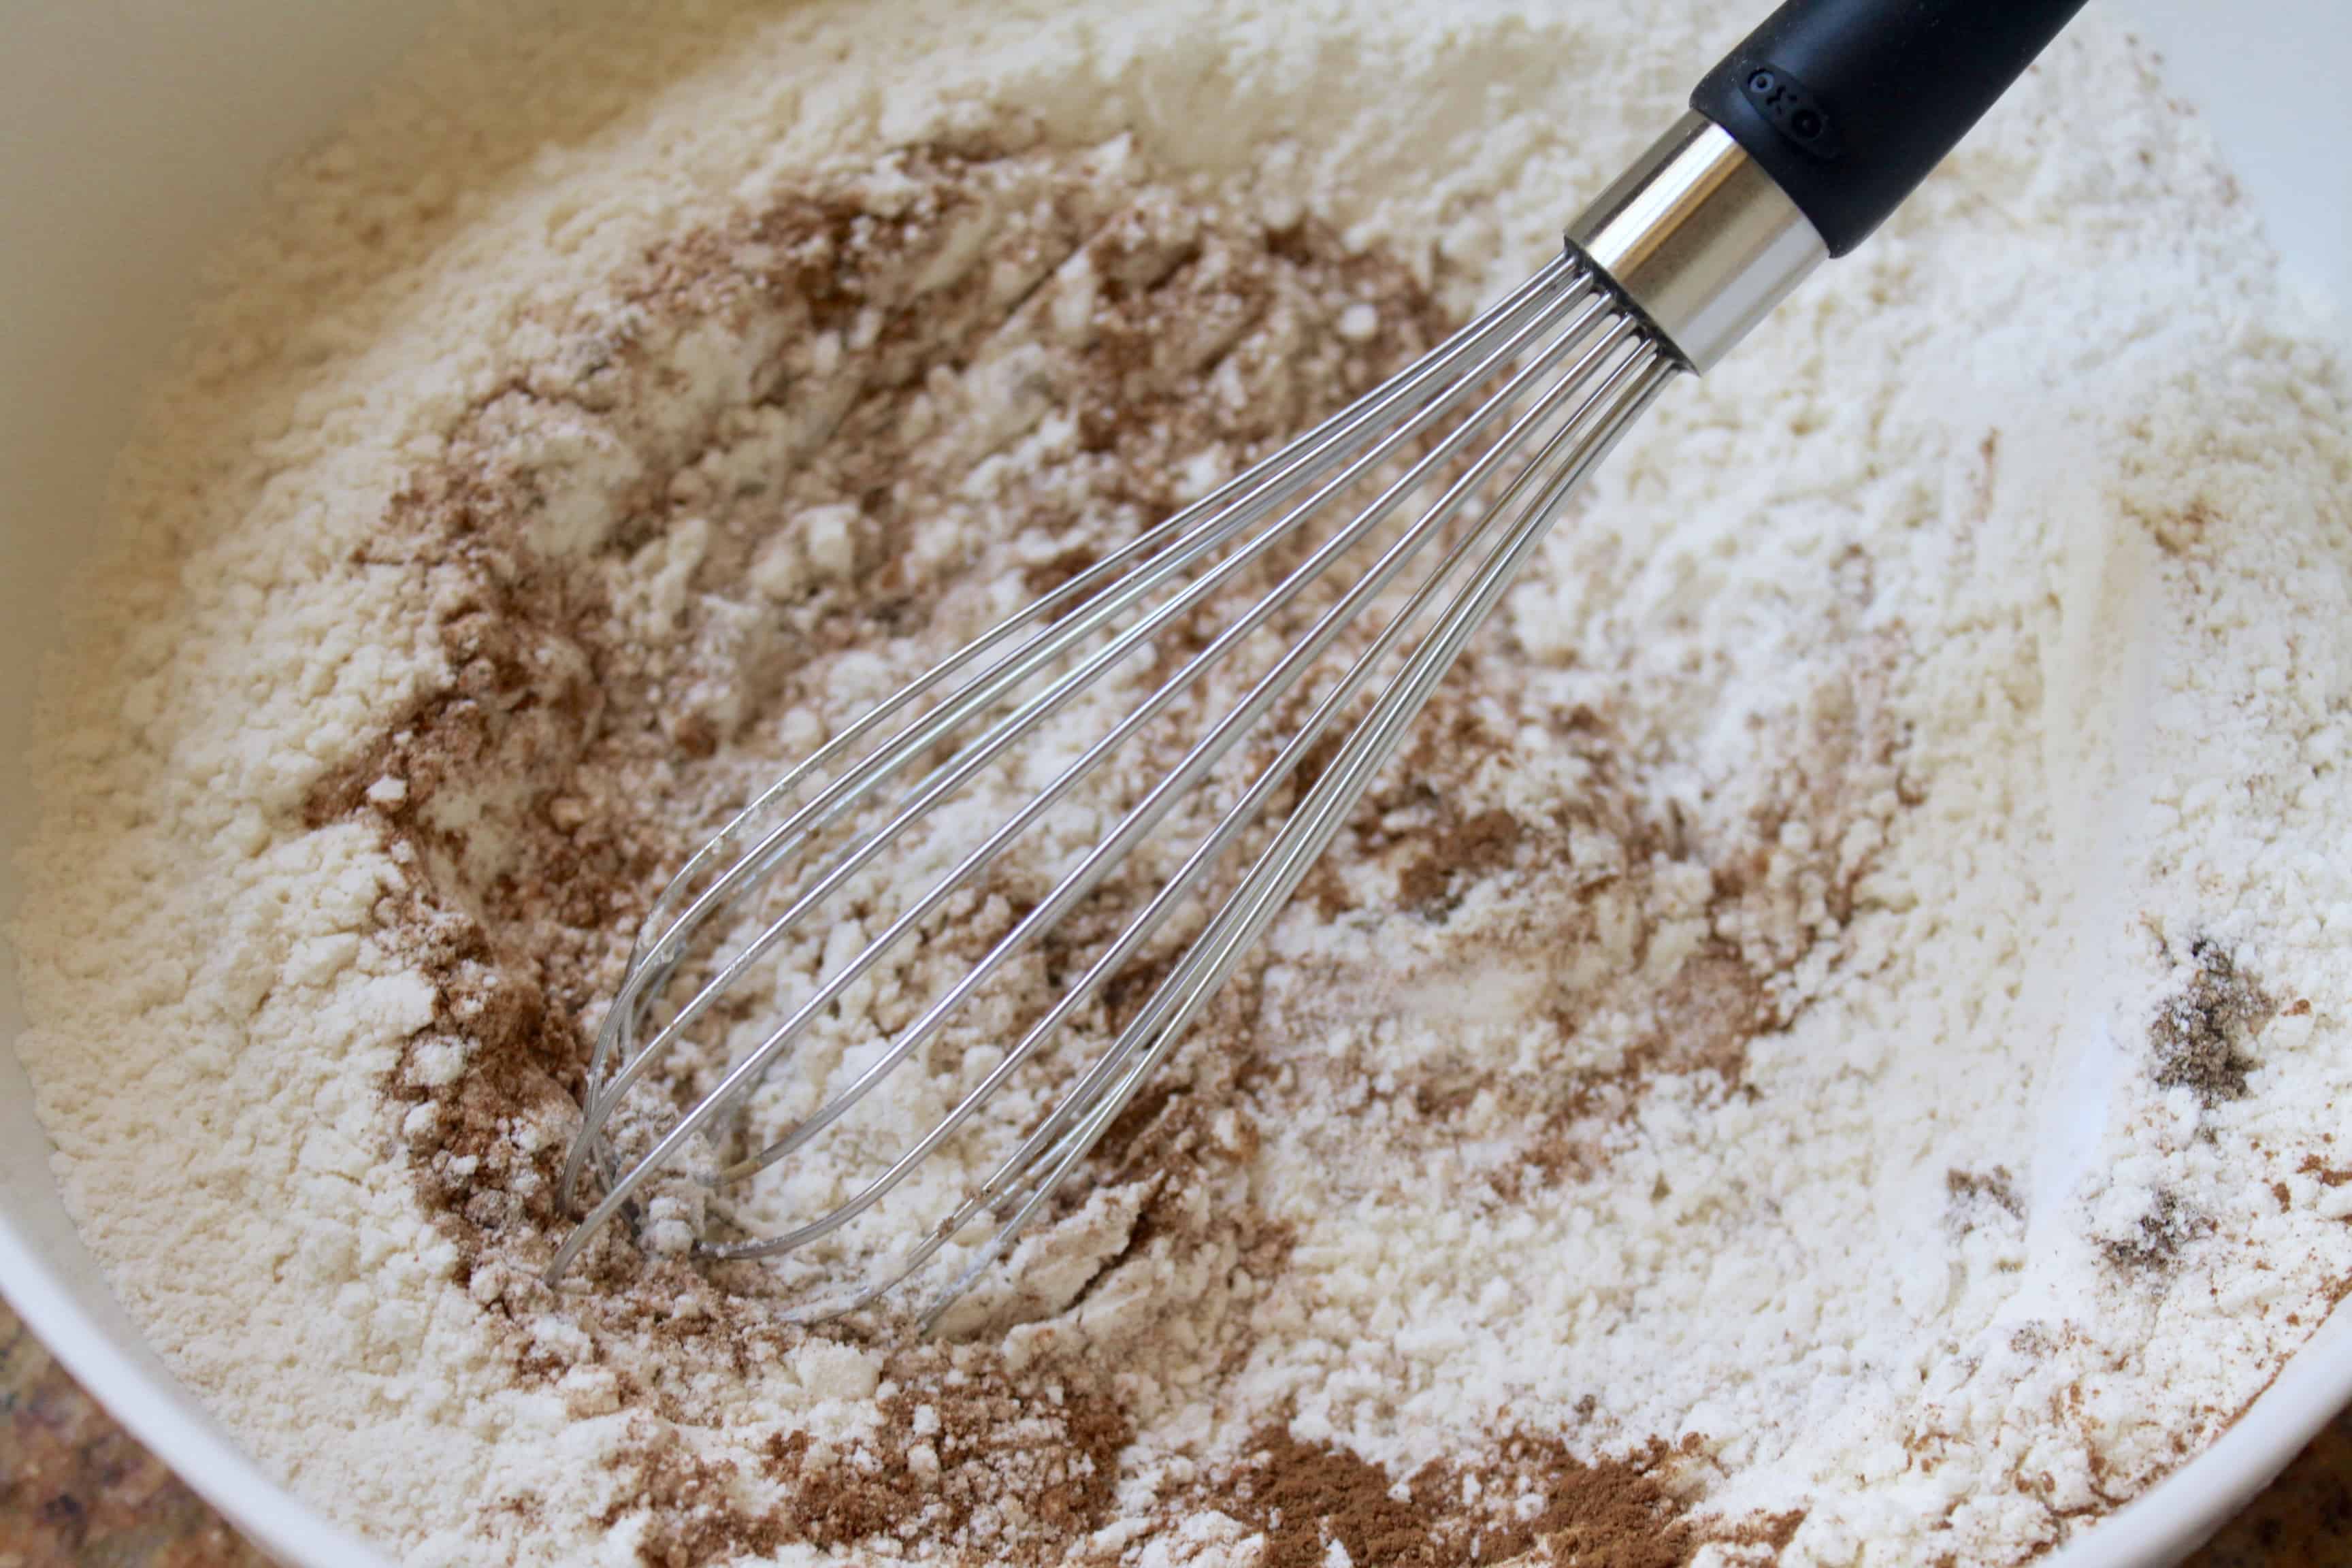 Whisking dry ingredients together with an OXO whisk